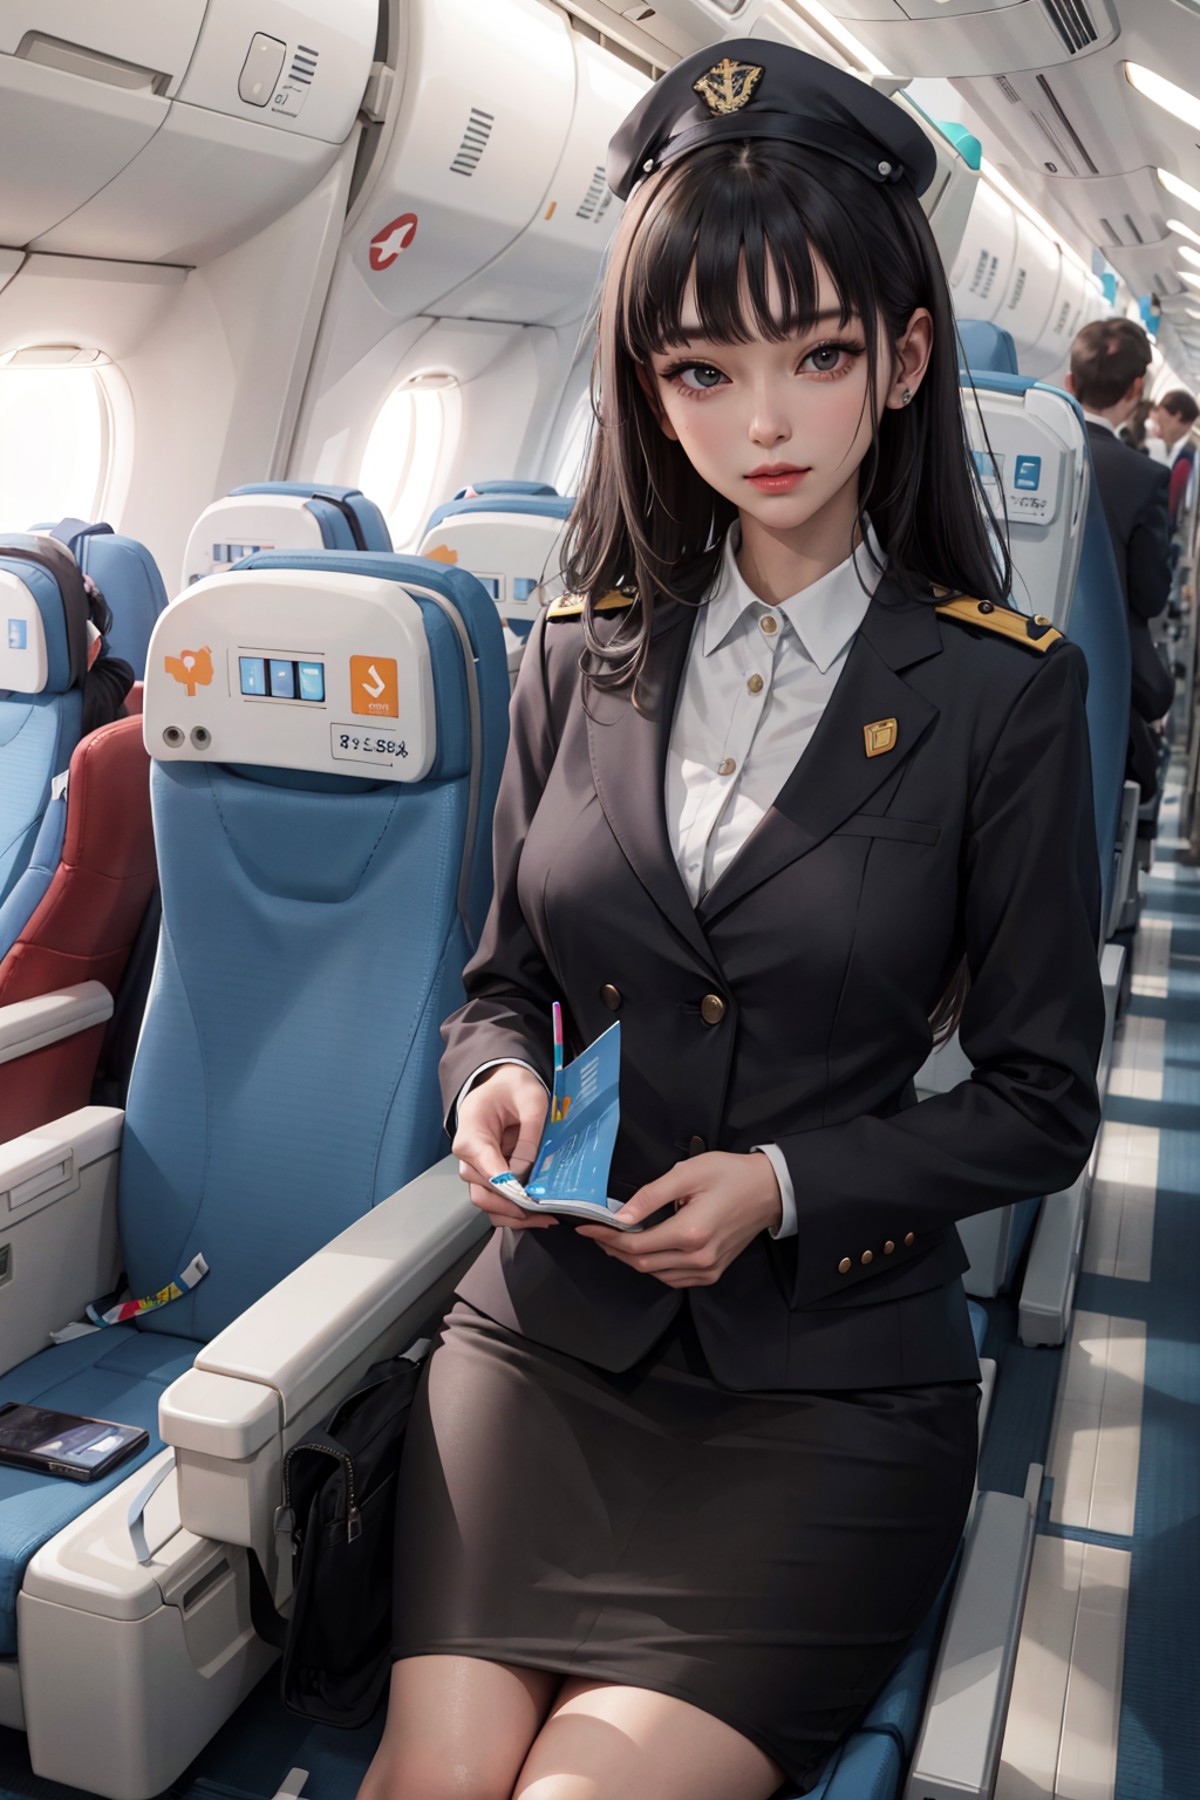 (masterpiece:1.2, best quality), 1lady, solo, Flight attendant, Uniform, Airplane, Serving passengers, Providing safety in...